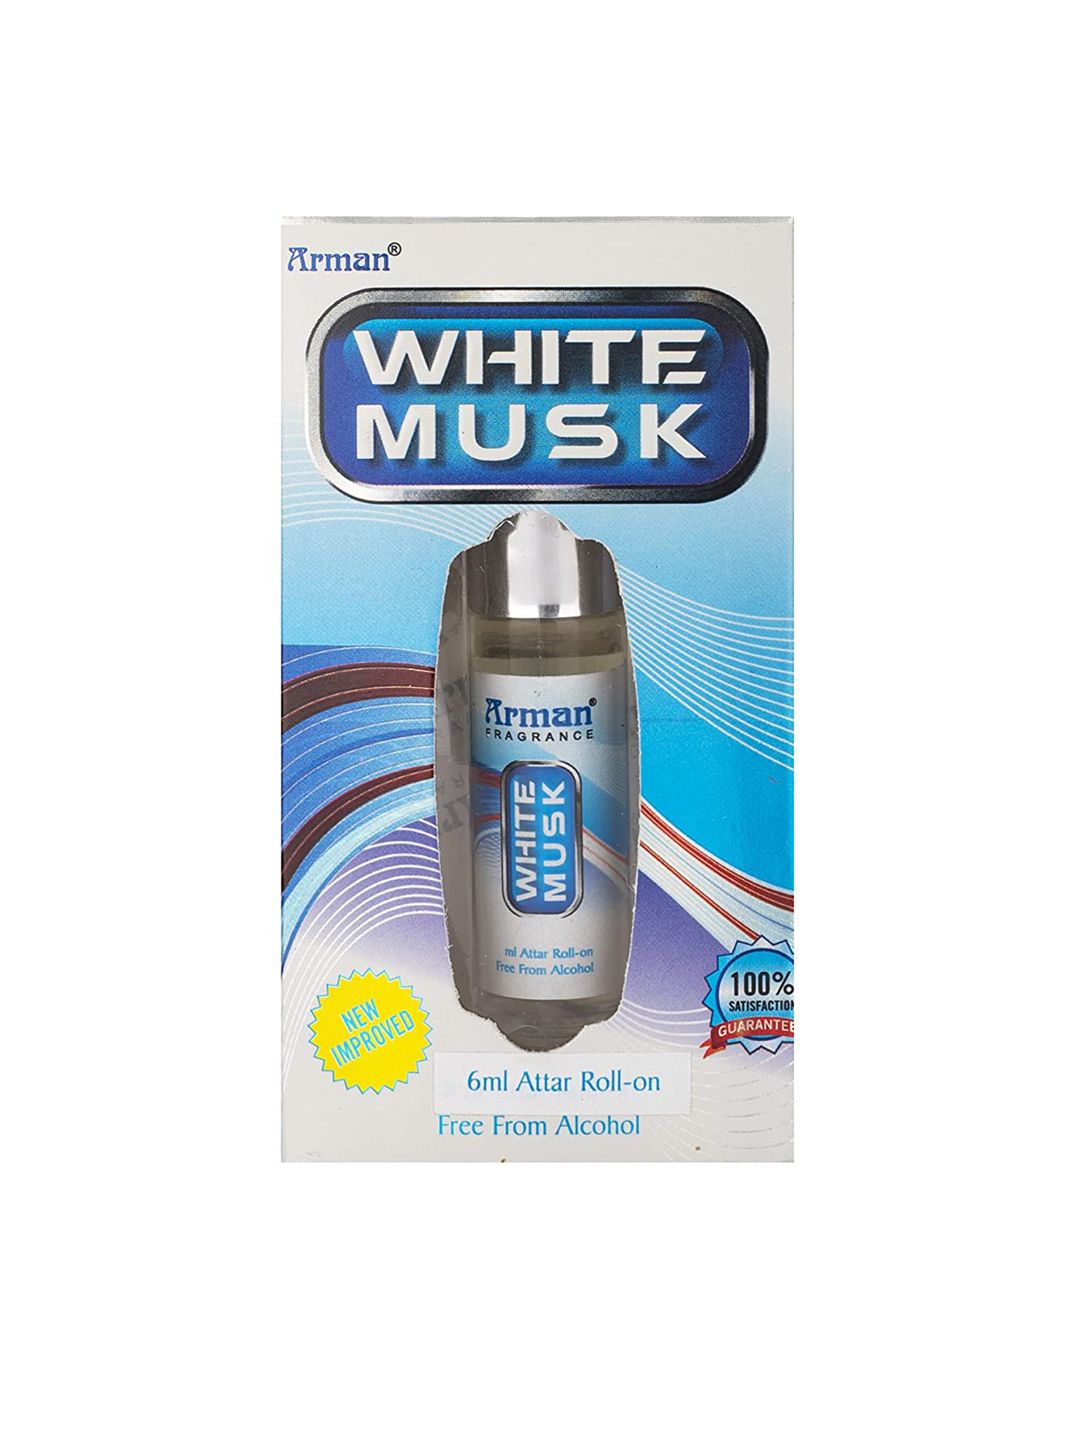 Arman Long Lasting Alcohol Free White Musk Attar Roll On - 6 ml Price in India